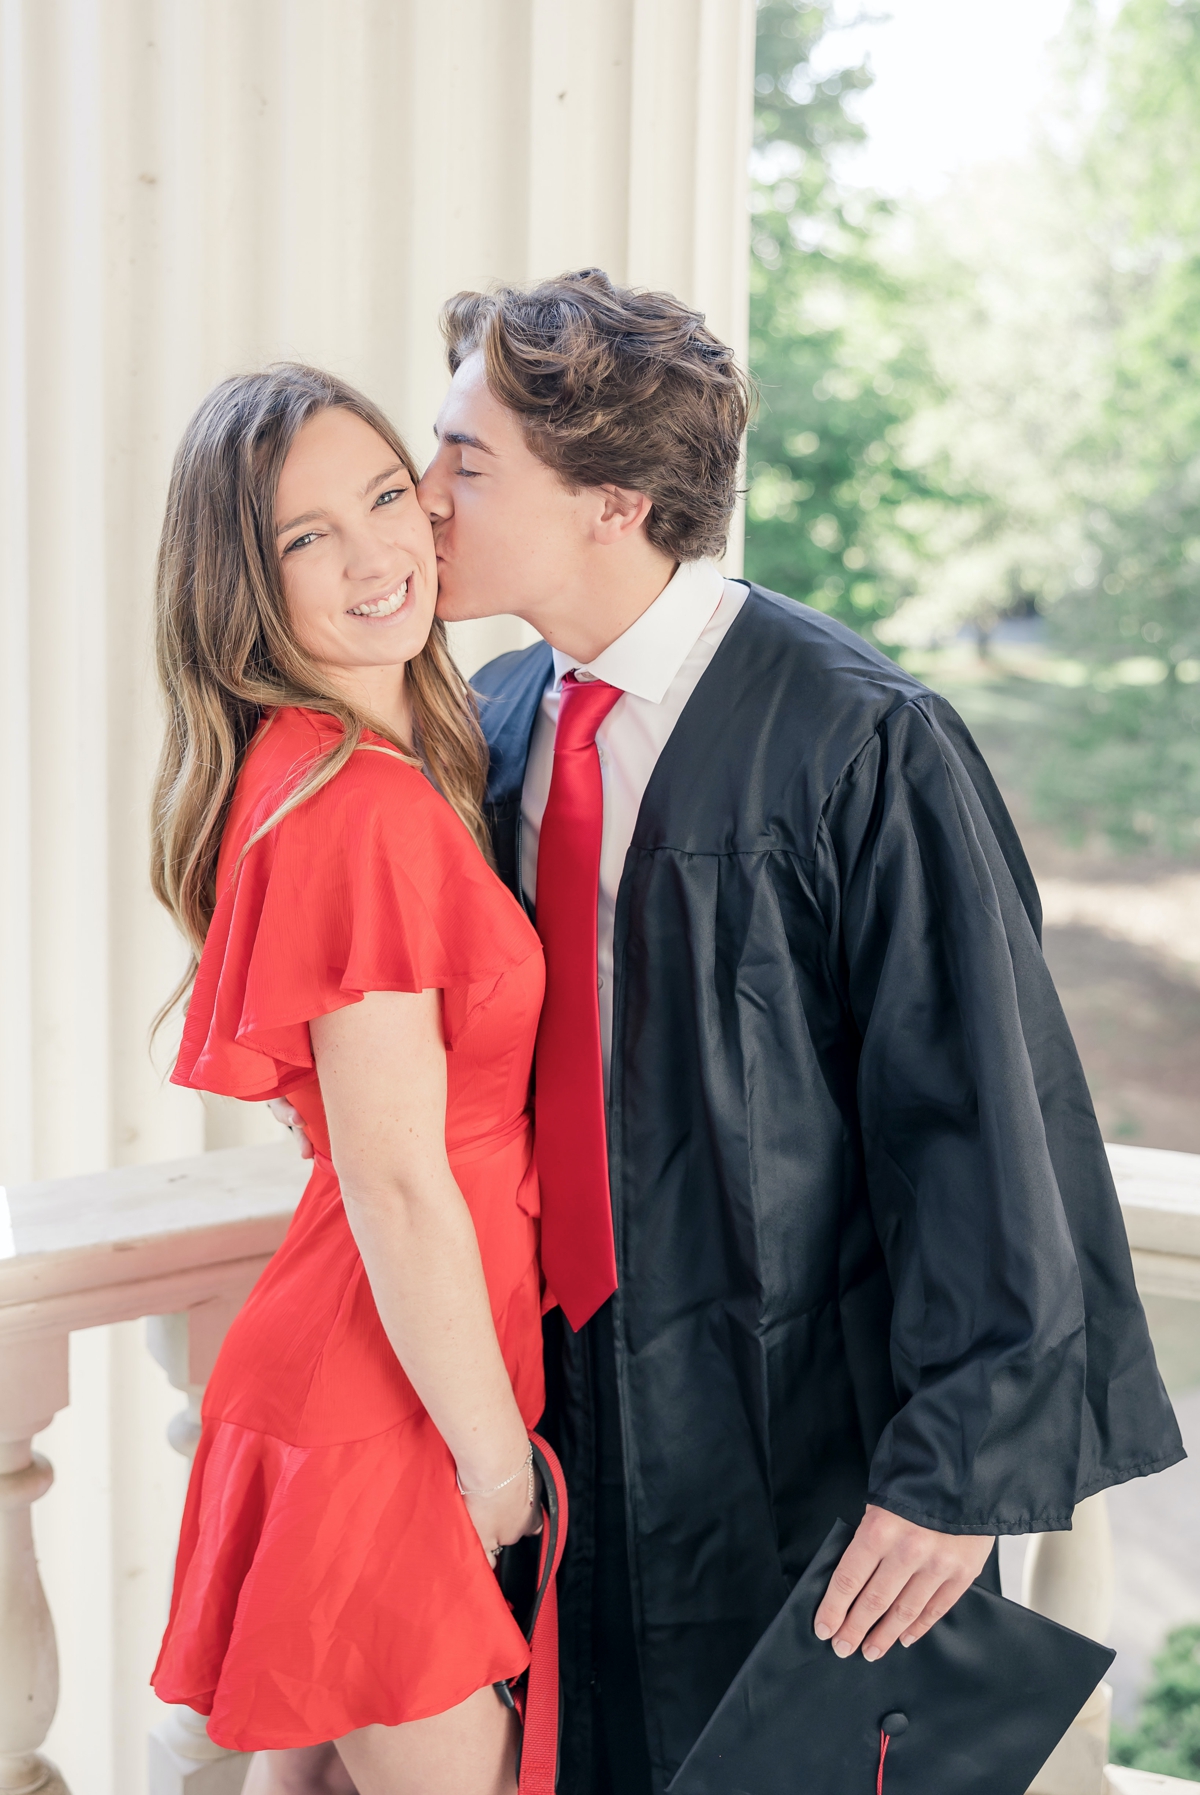 UGA graduate kisses his girlfriend on the cheek while they both stand on the porch of a campus building.